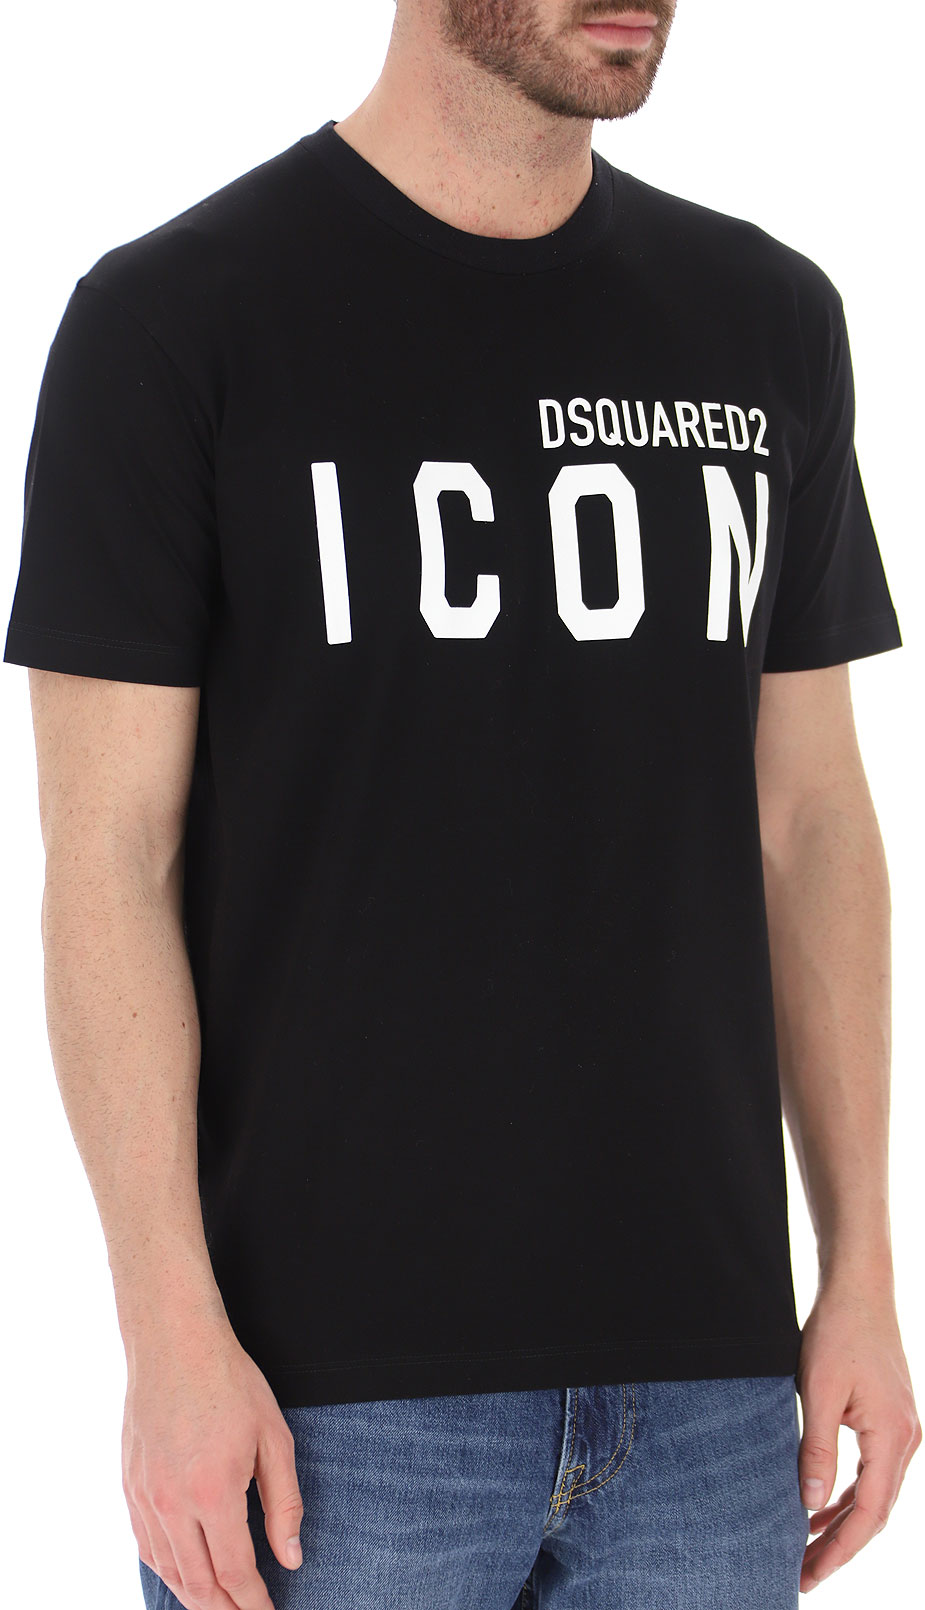 Mens Clothing Dsquared2, Style code: s79gc0003-s23009-980